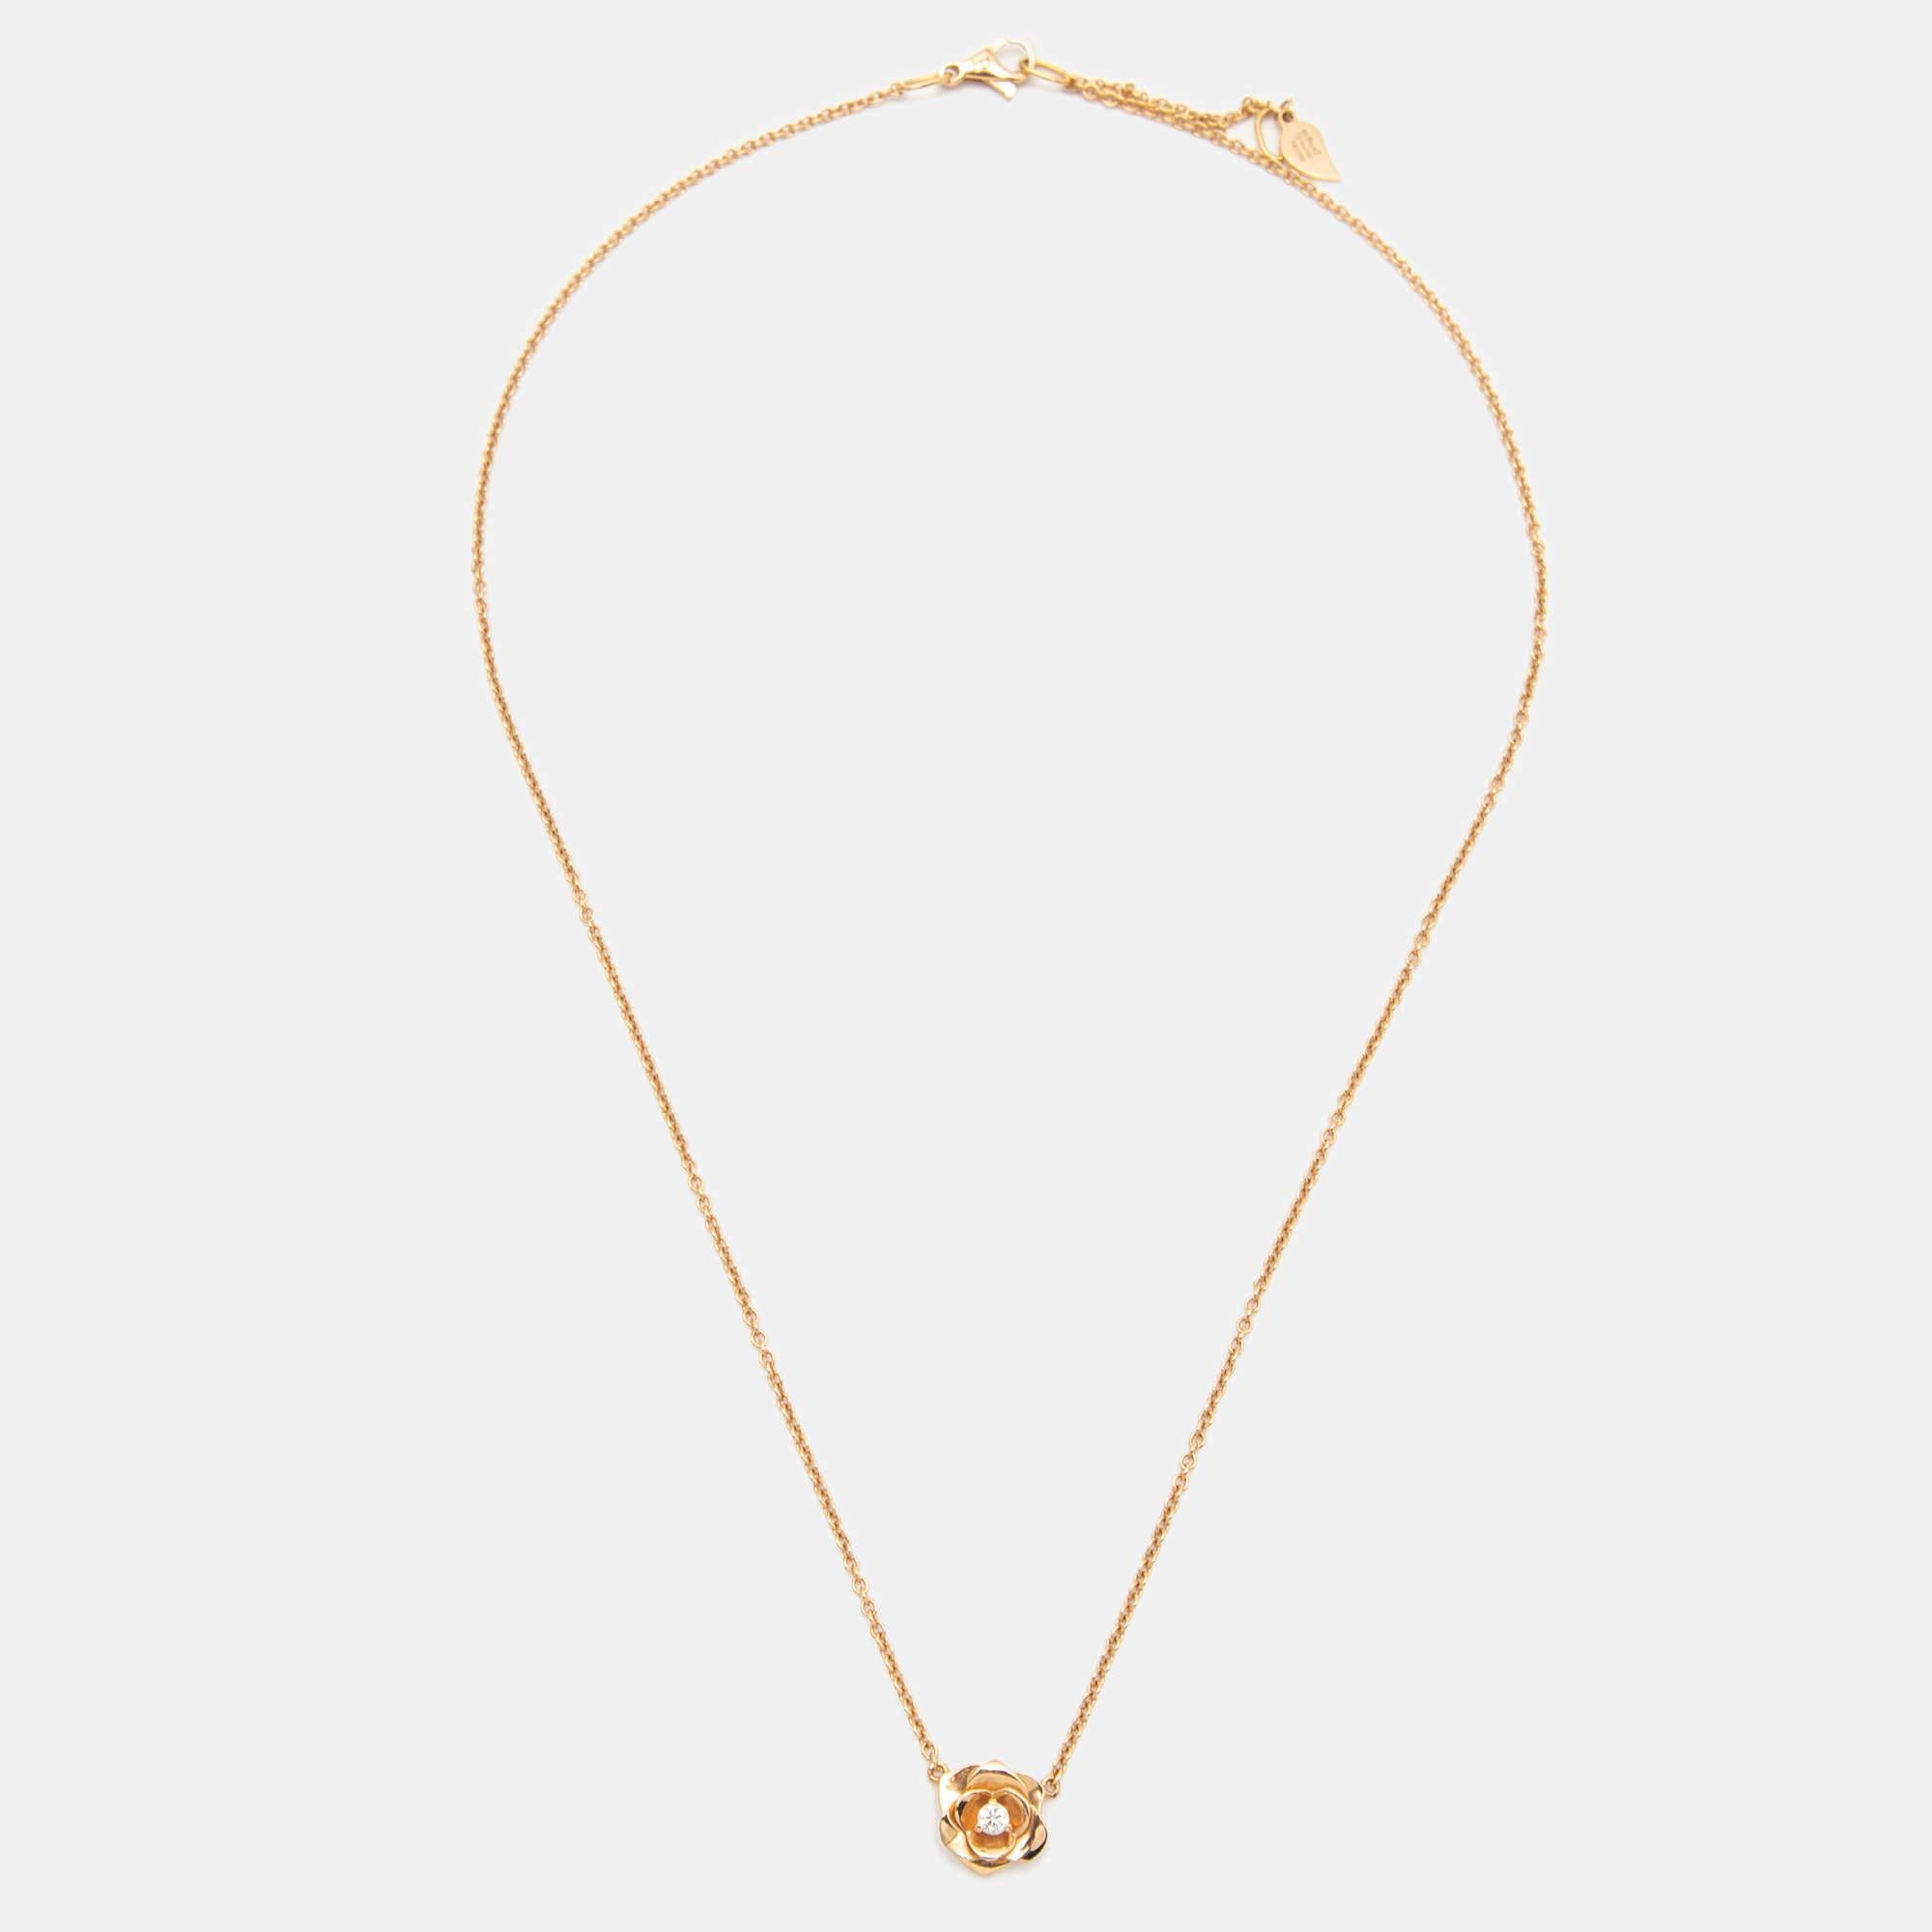 Piaget's Rose collection celebrates the beauty and essence of a rose for it is indeed the most romantic of nature's flowers. This exquisite necklace successfully transfers that essence into 18K rose gold. A blooming rose with its petals skillfully